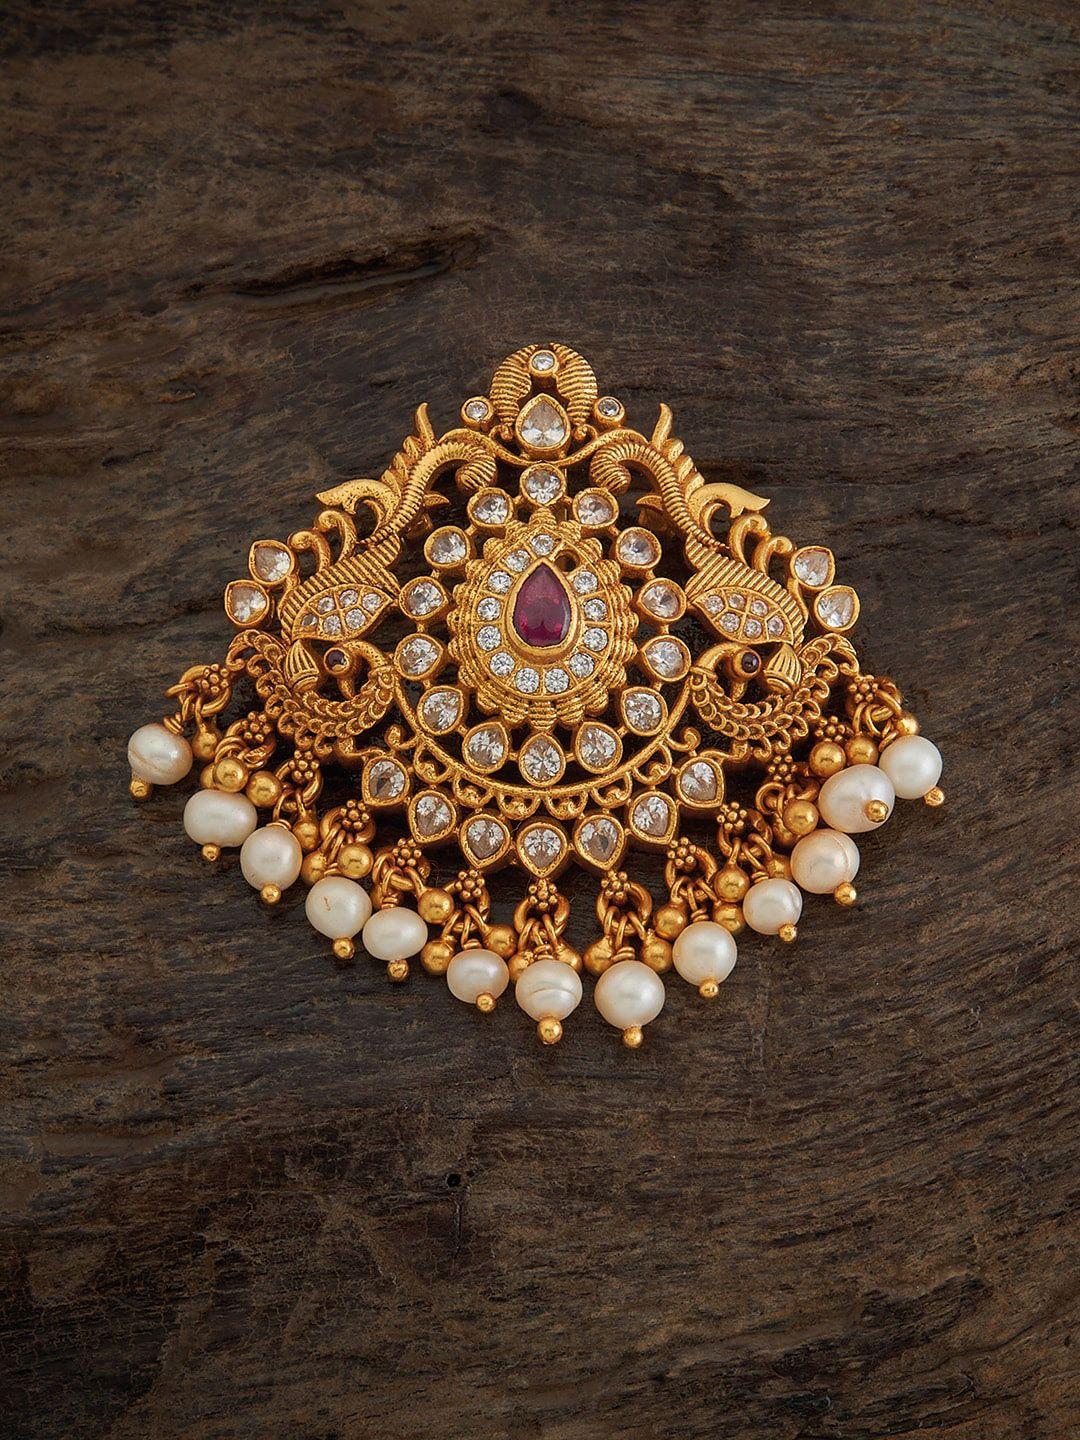 kushal's fashion jewellery 92.5 sterling silver gold-plated stone-studded temple pendant